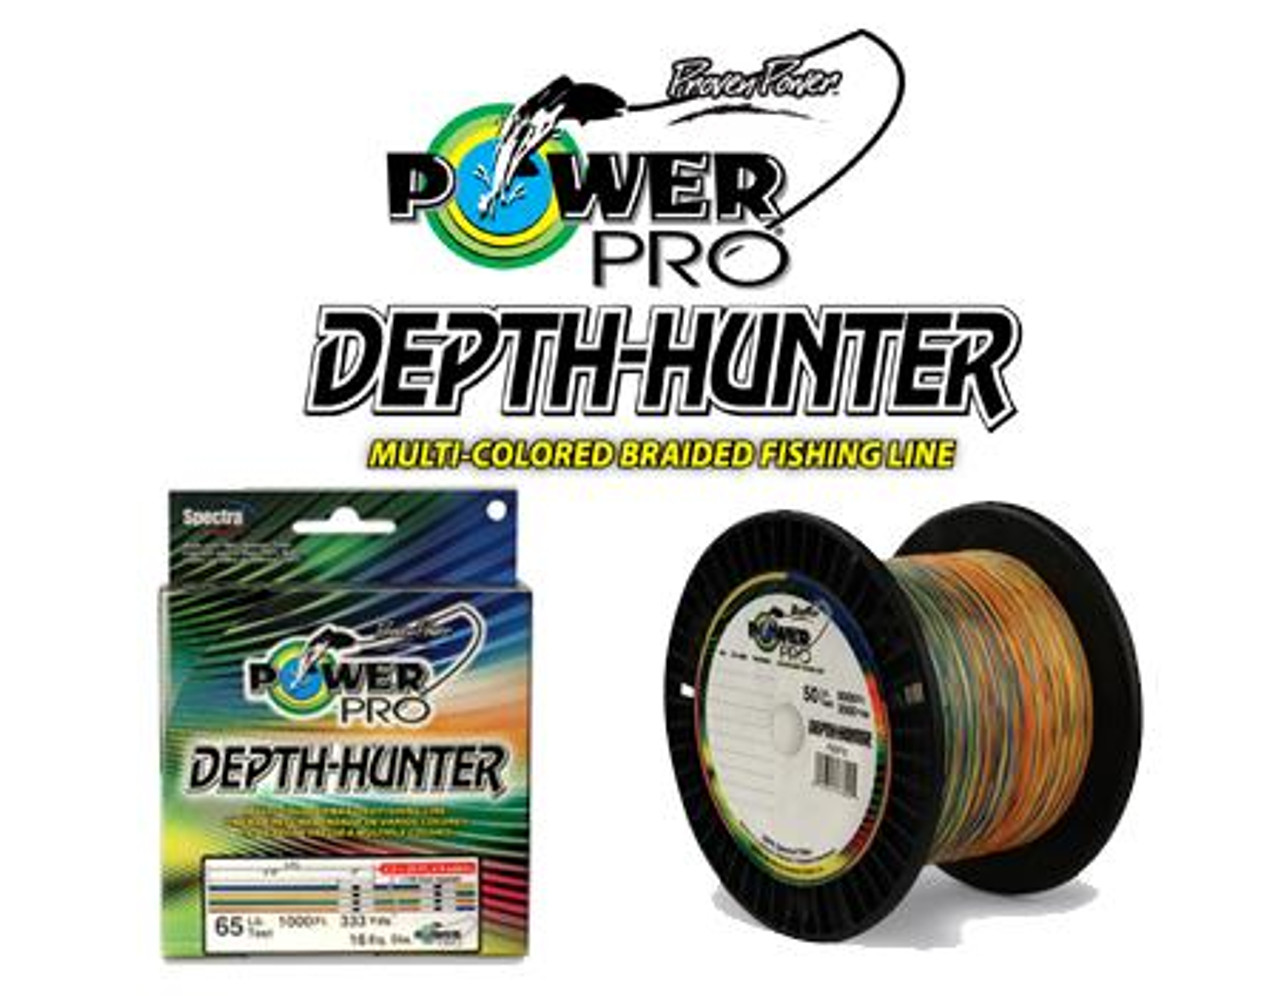 2 Fishing Line Counters for Spool and Towing, Fishing Line Depth